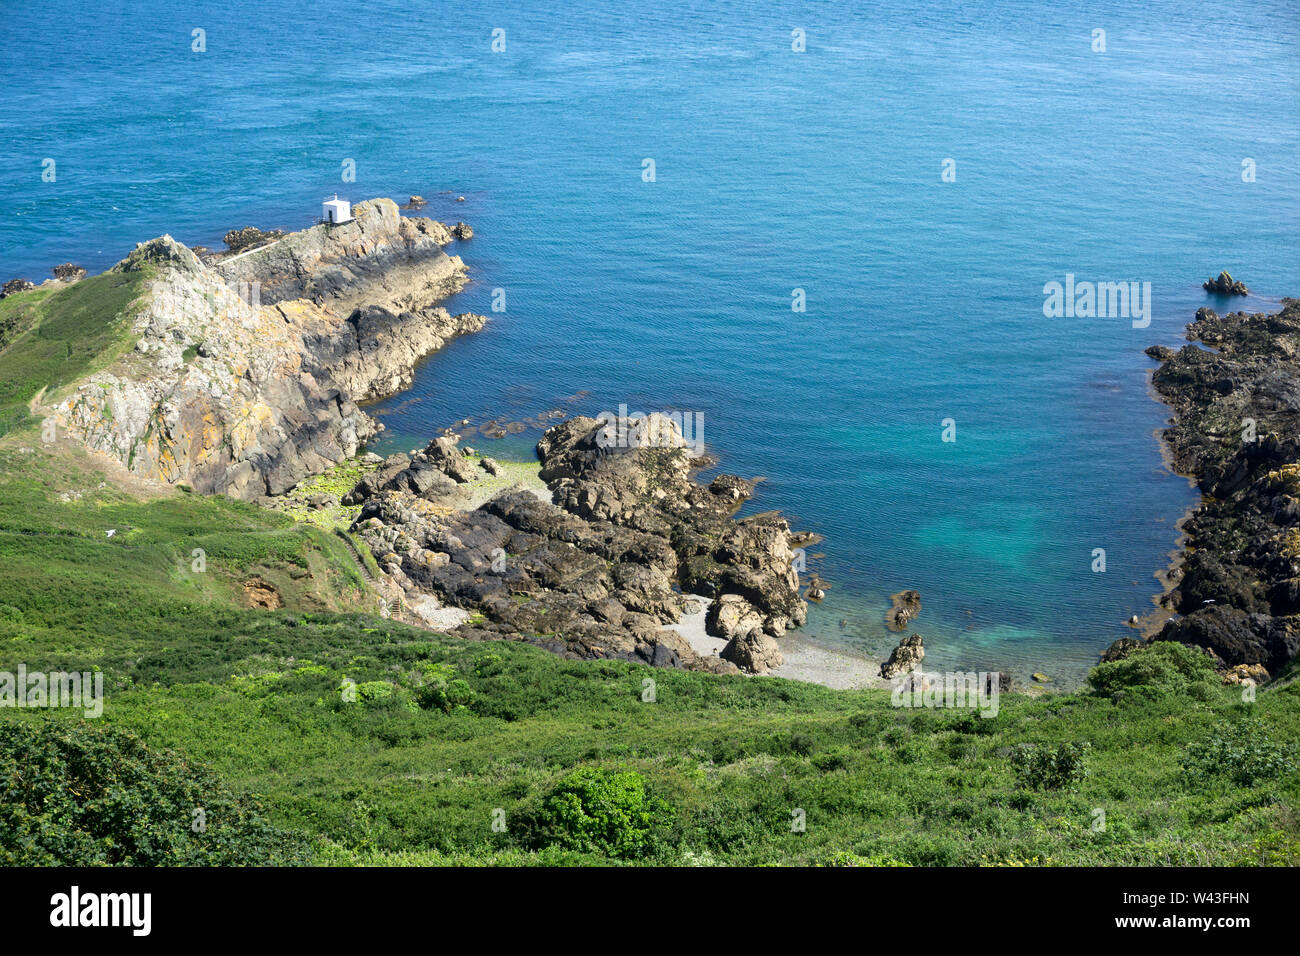 St Martins punto Guernsey, Isole del Canale. Foto Stock